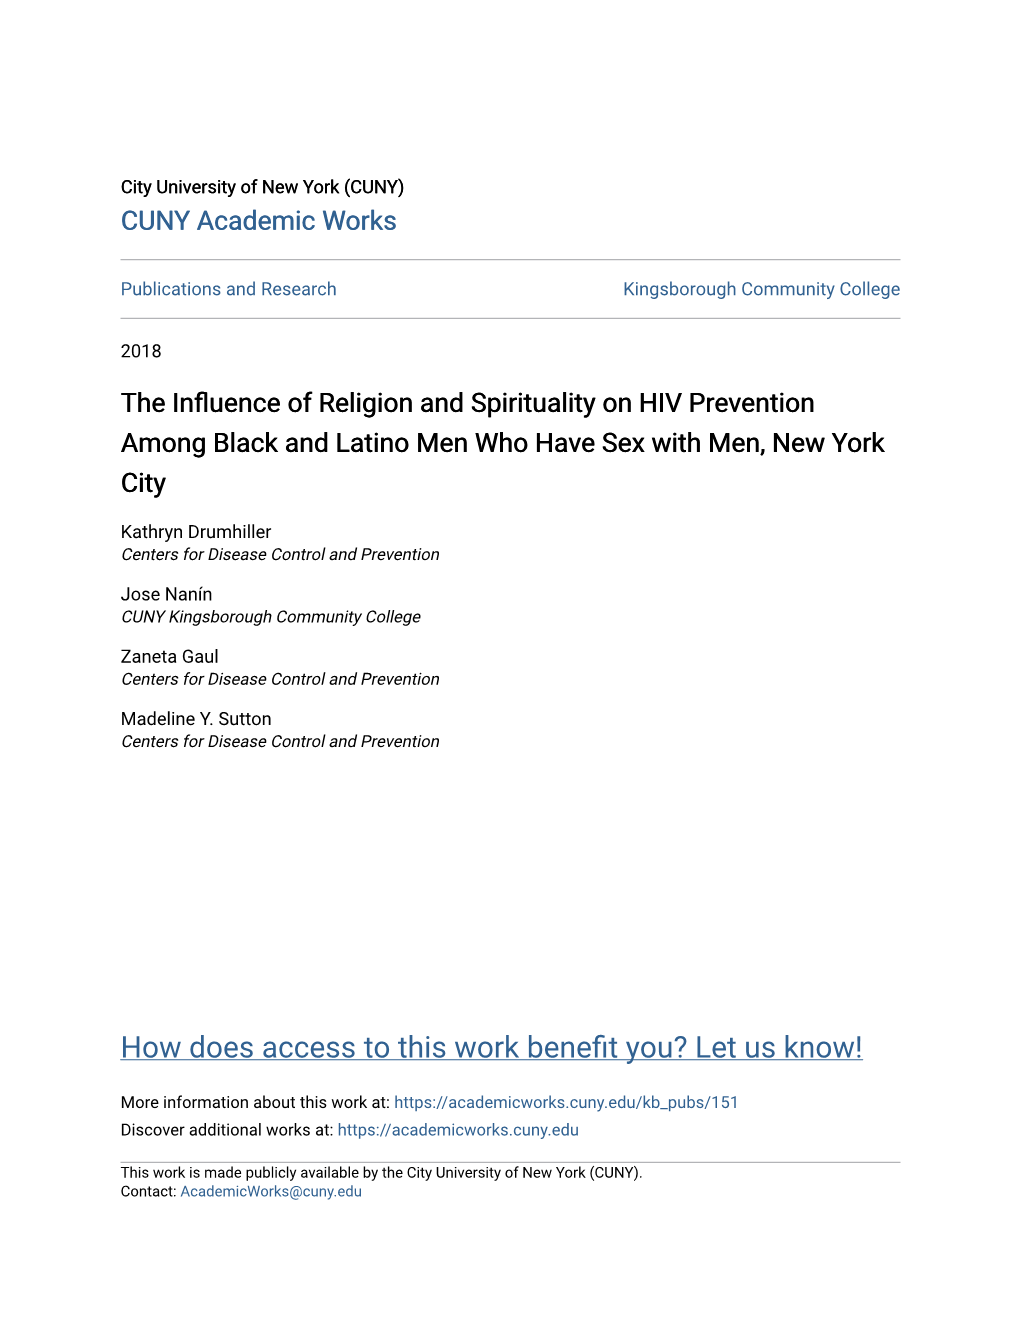 The Influence of Religion and Spirituality on HIV Prevention Among Black and Latino Men Who Have Sex with Men, New York City